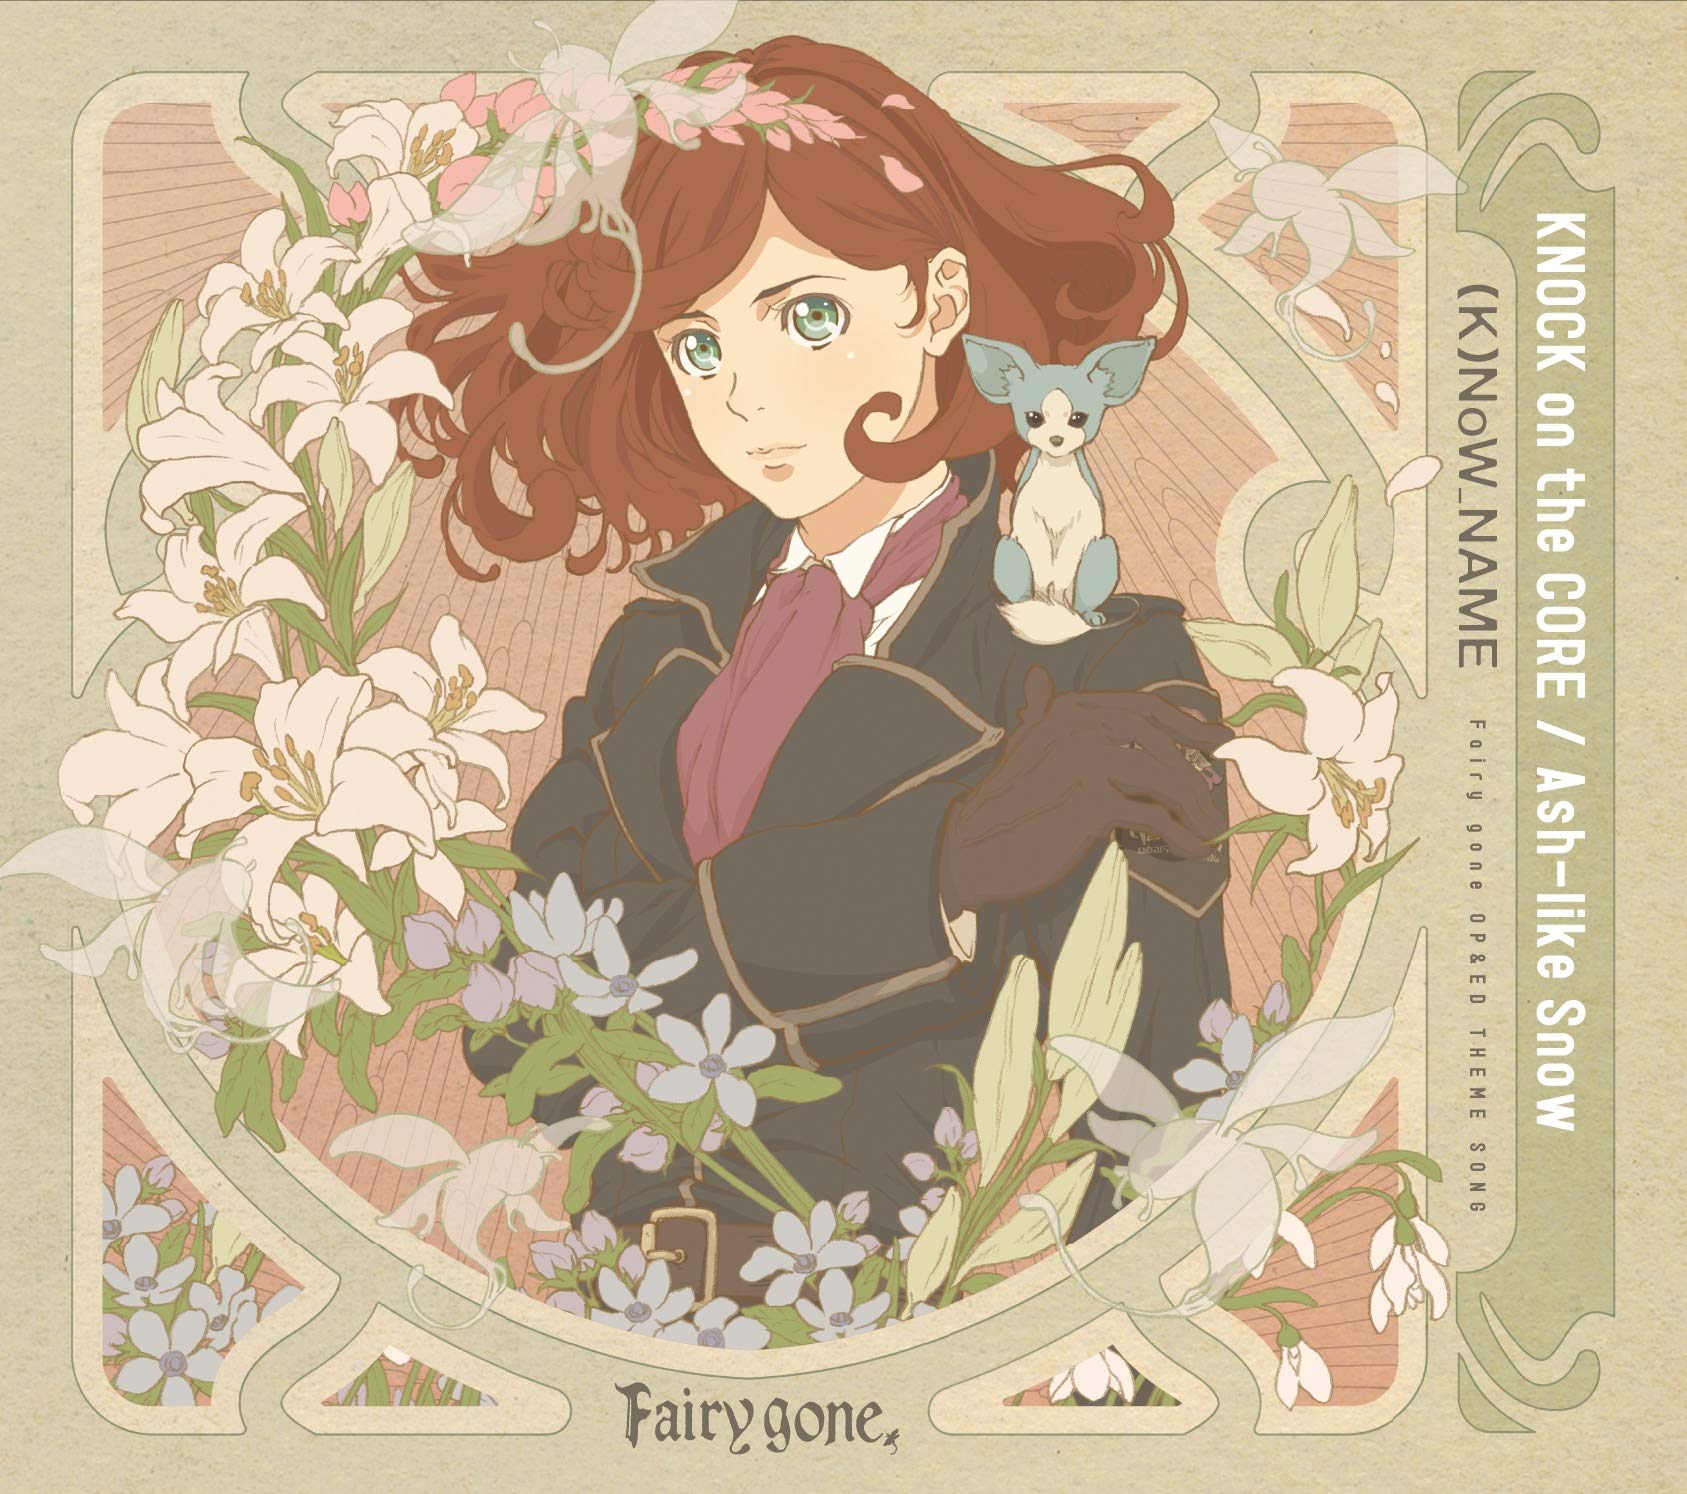 (K)NoW_NAME - TVアニメ『Fairy gone フェアリーゴーン』OP&ED THEME SONG「KNOCK on the CORE/Ash-like Snow」 [FLAC 24bit/96kHz]